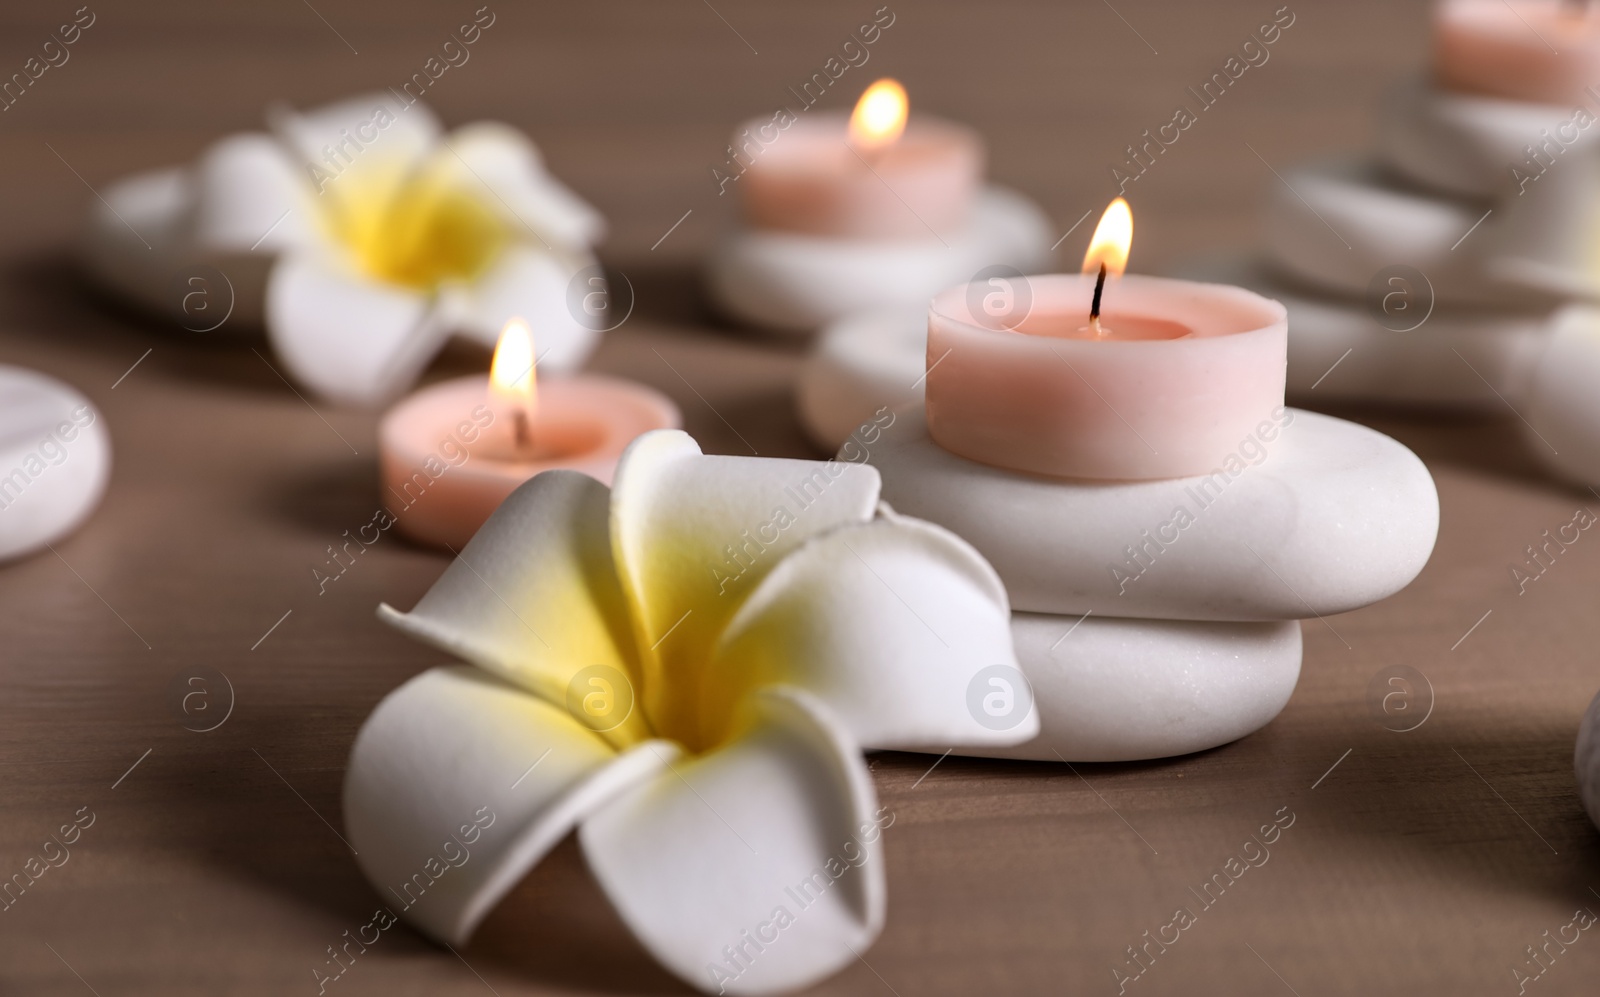 Photo of Spa stones, flowers and burning candles on wooden table